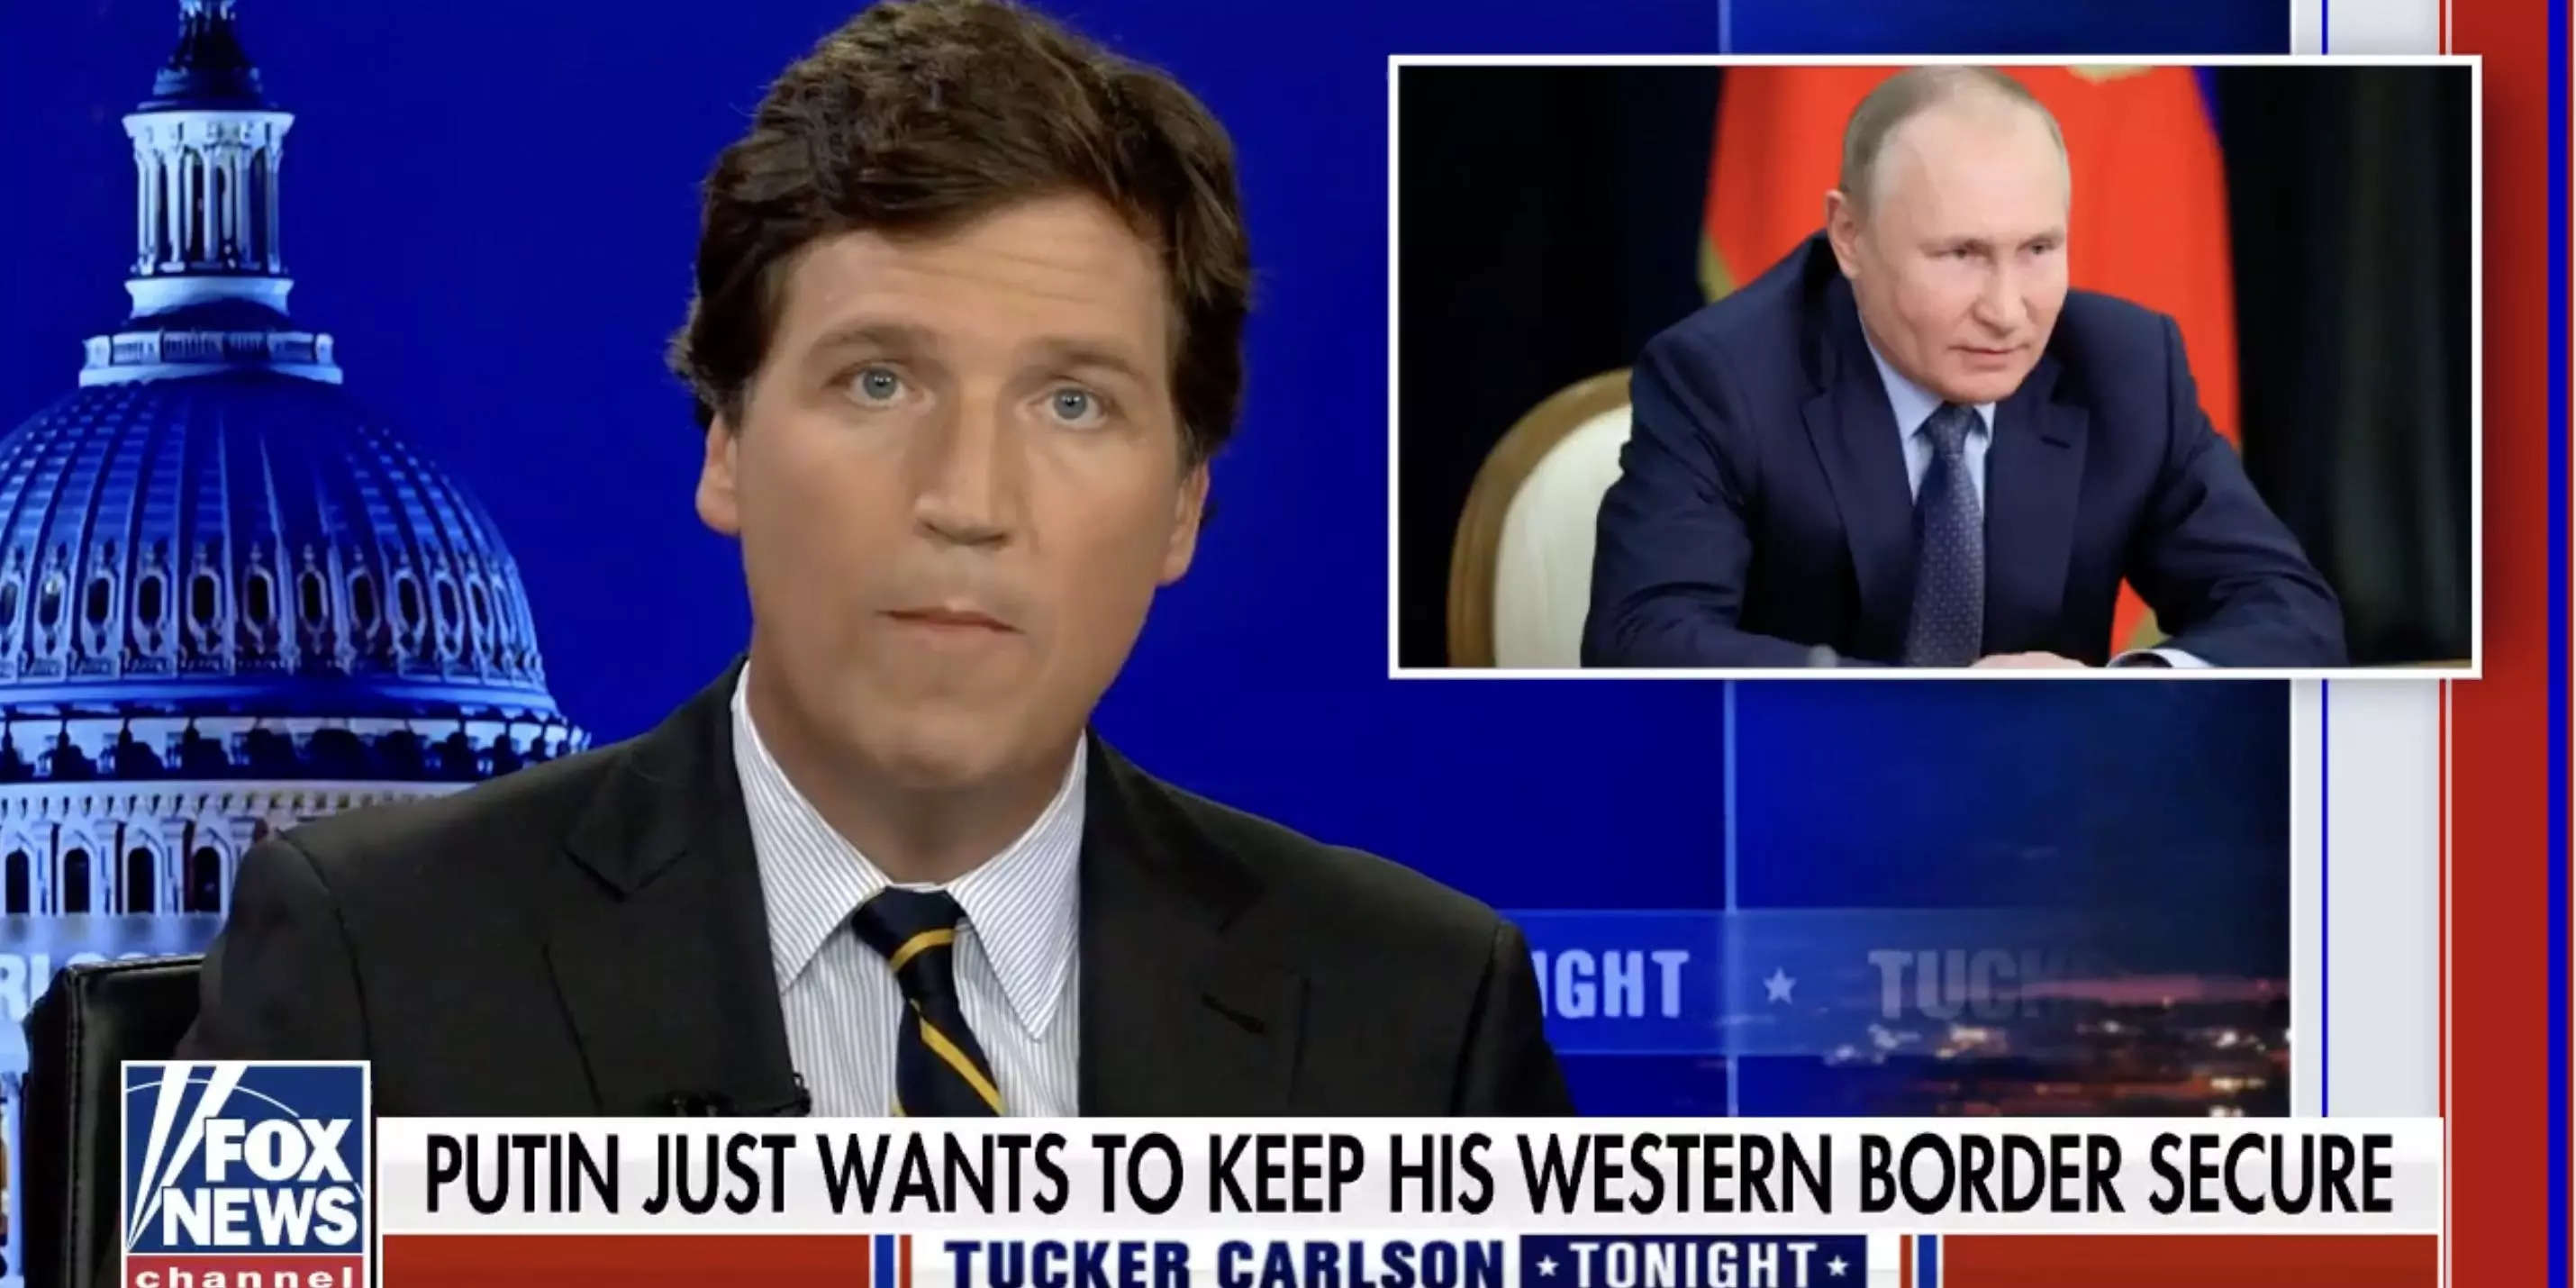 https://www.businessinsider.in/photo/89162111/tucker-carlson-told-the-new-york-times-hes-not-a-russian-agent-amid-controversy-over-his-pro-kremlin-stance.jpg?imgsize=110632